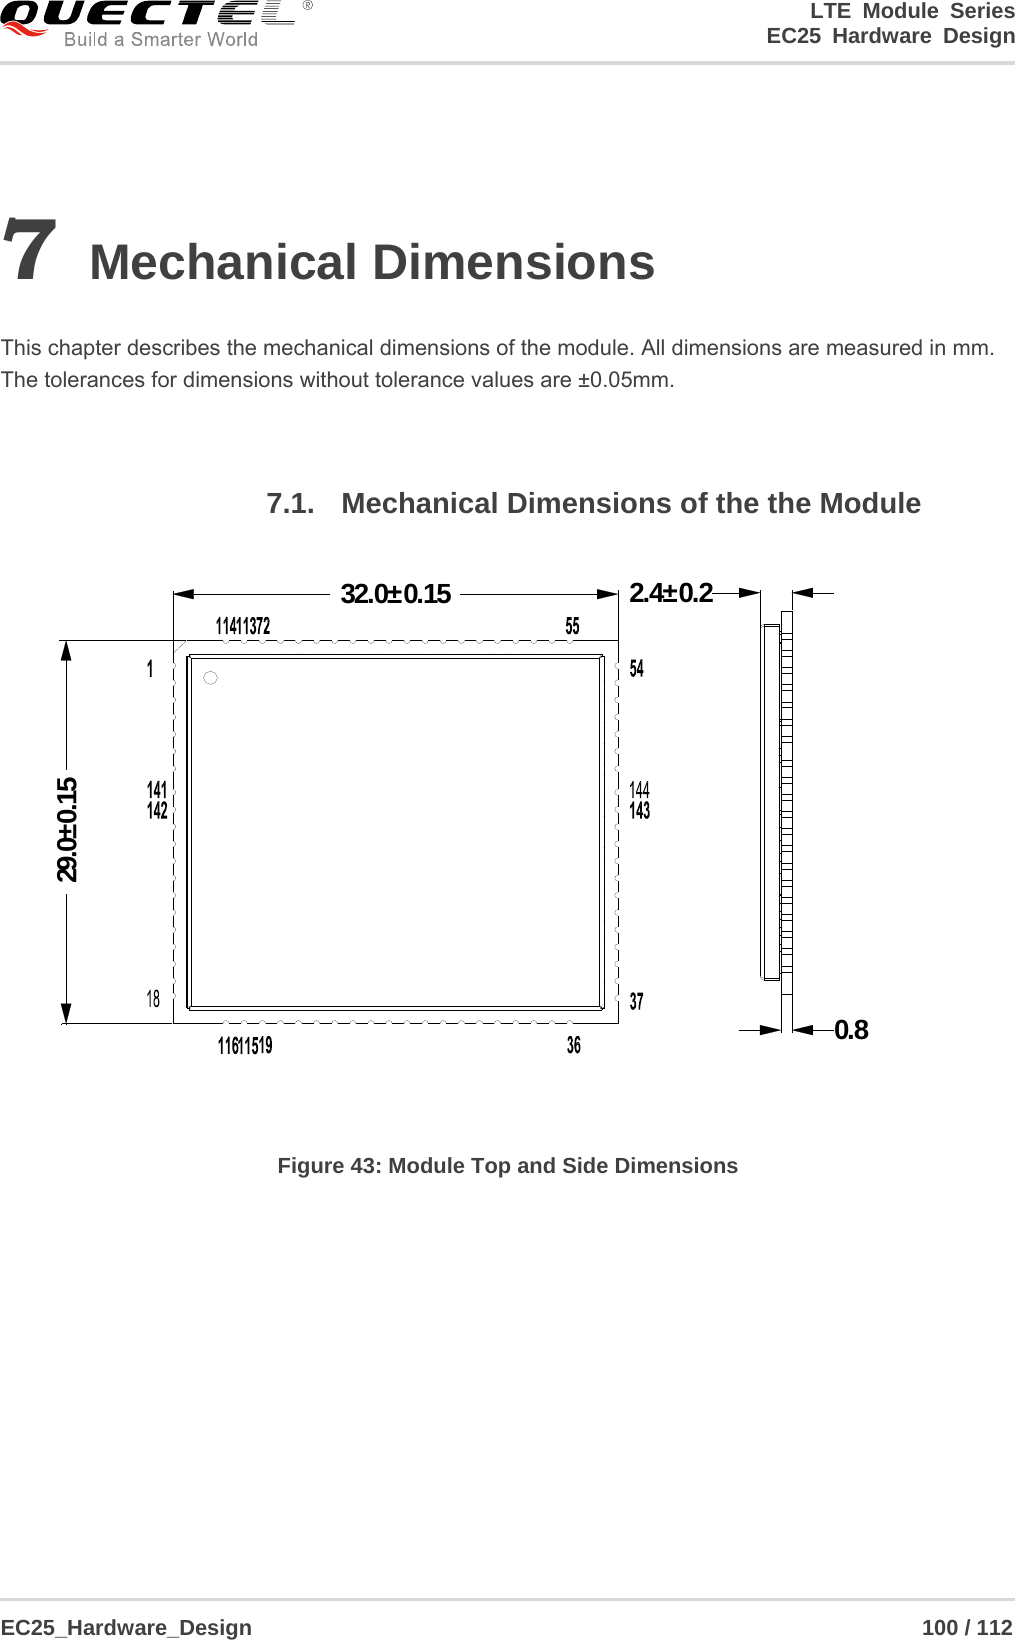 LTE Module Series                                                  EC25 Hardware Design  EC25_Hardware_Design                                                             100 / 112    7 Mechanical Dimensions  This chapter describes the mechanical dimensions of the module. All dimensions are measured in mm. The tolerances for dimensions without tolerance values are ±0.05mm.  7.1. Mechanical Dimensions of the the Module 32.0±0.1529.0±0.150.82.4±0.2 Figure 43: Module Top and Side Dimensions  